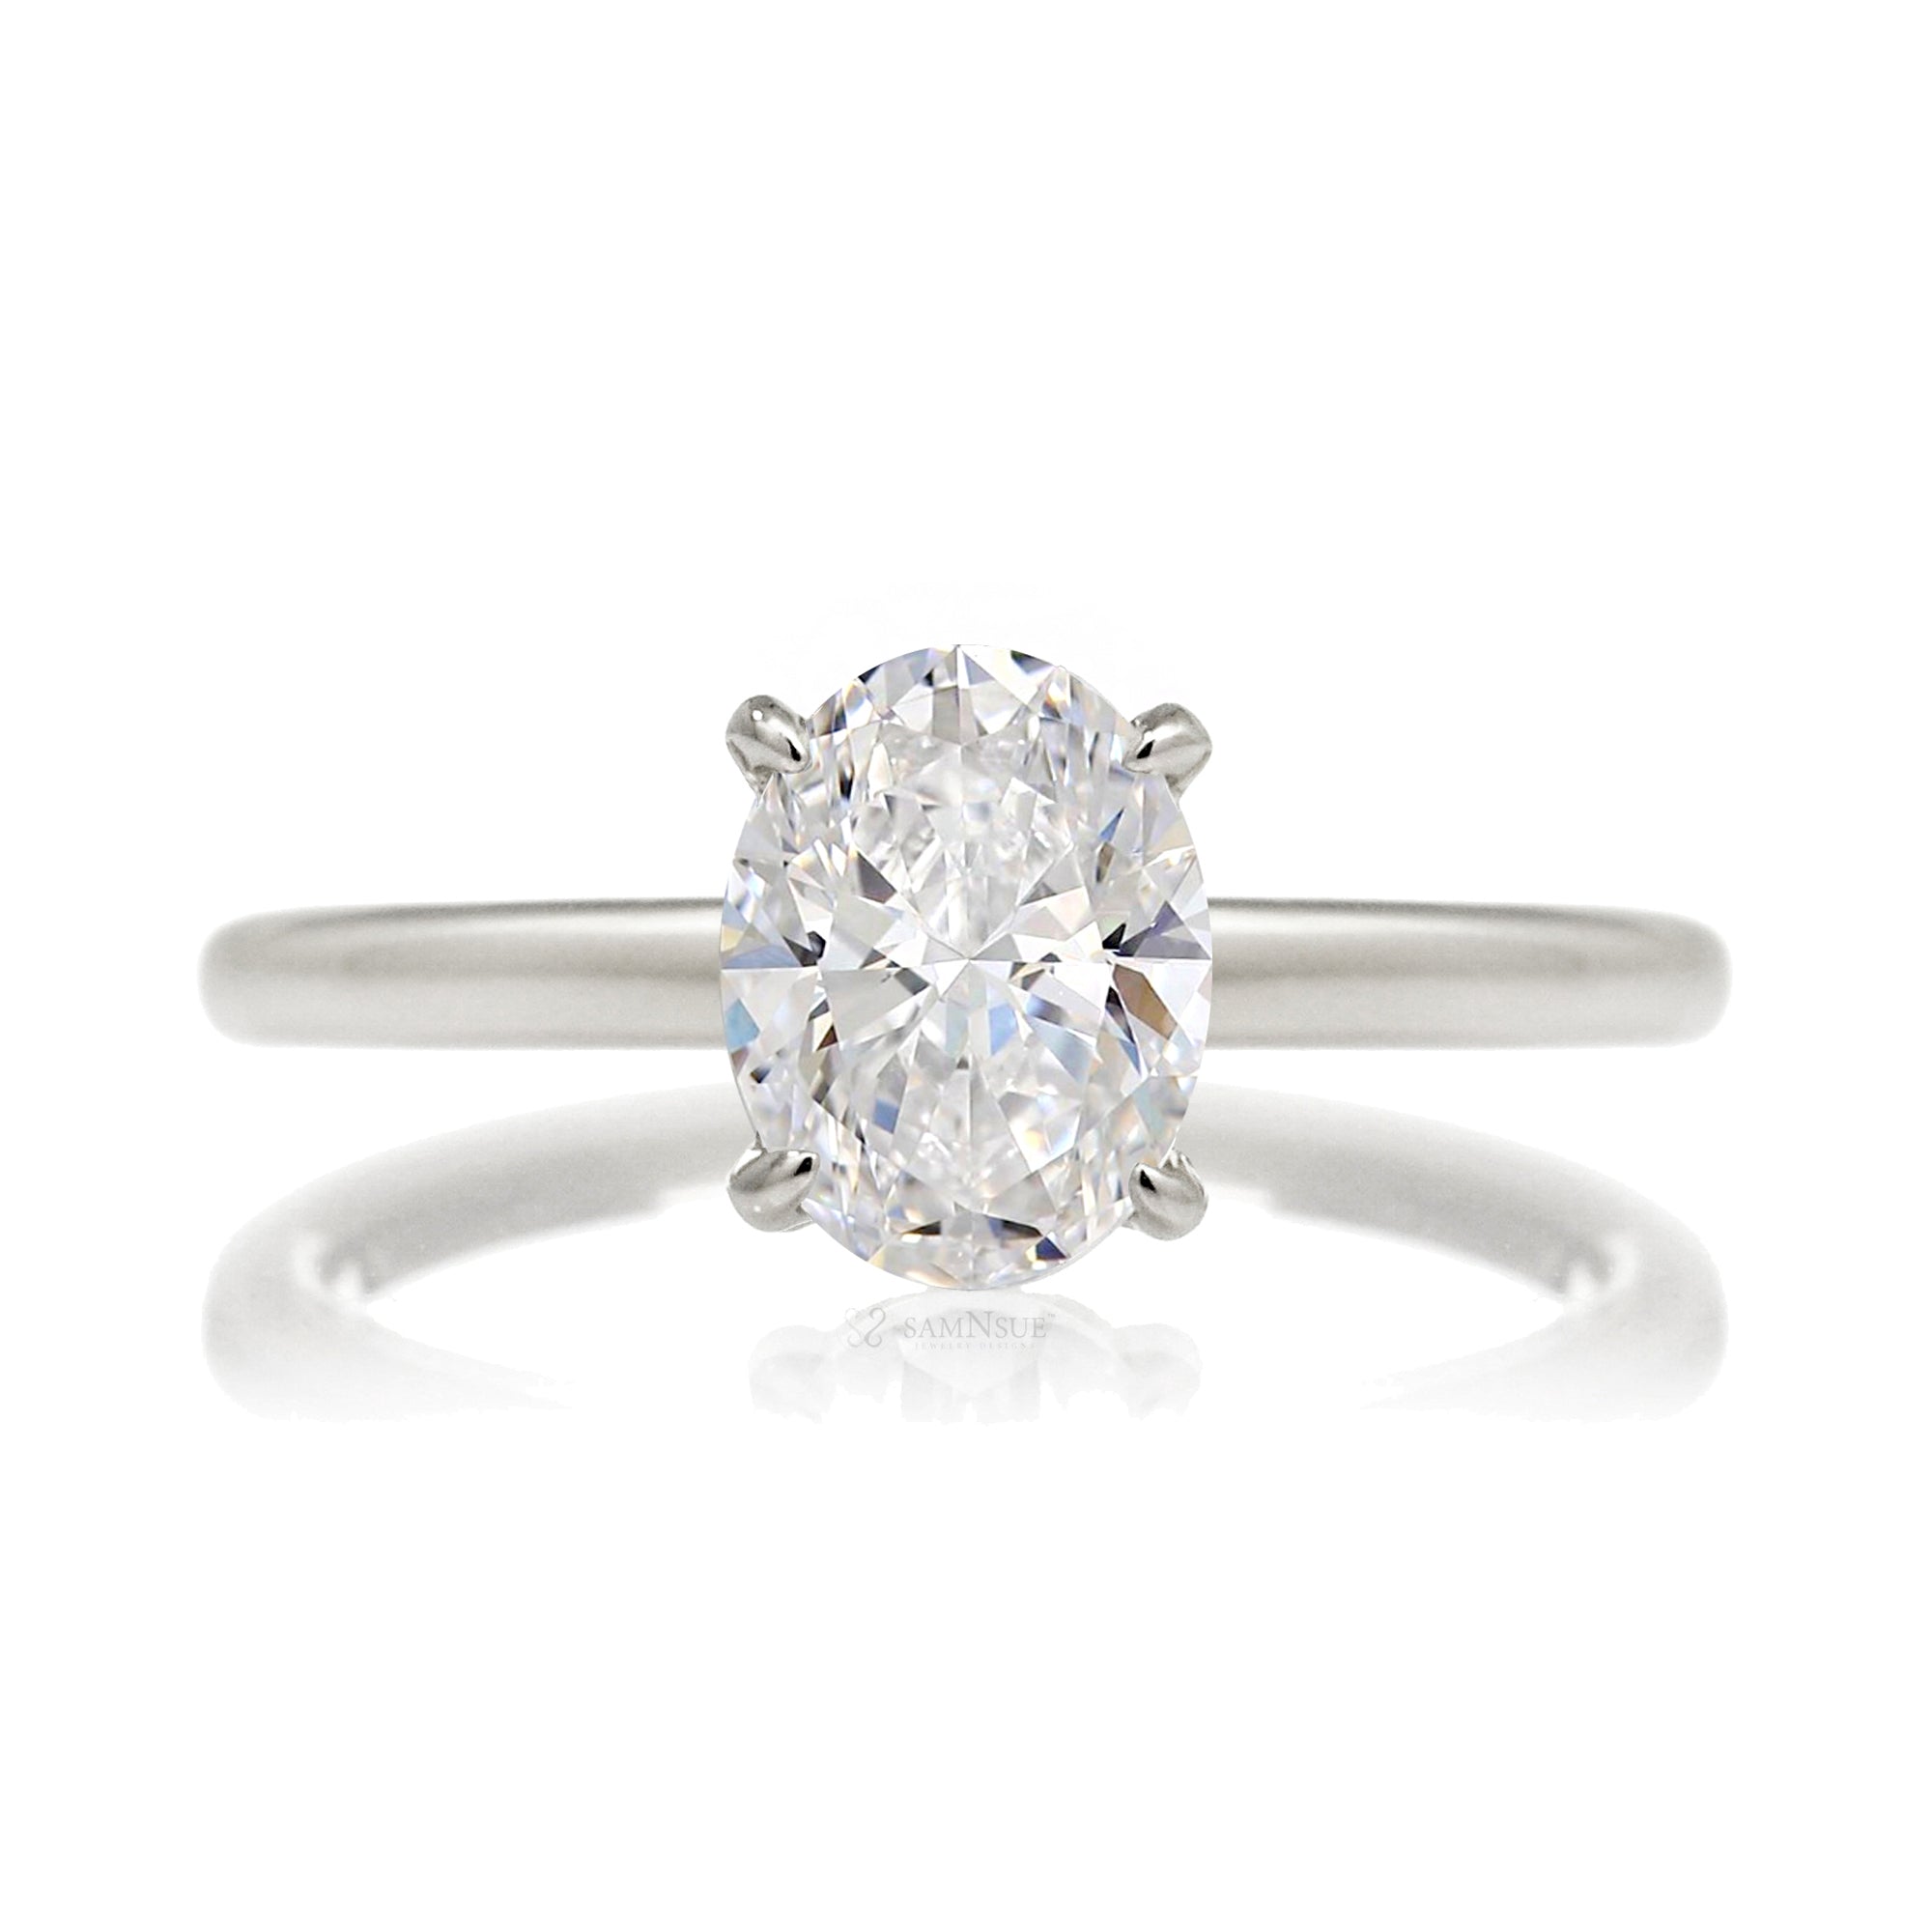 Oval diamond engagement ring solid band hidden halo in white gold